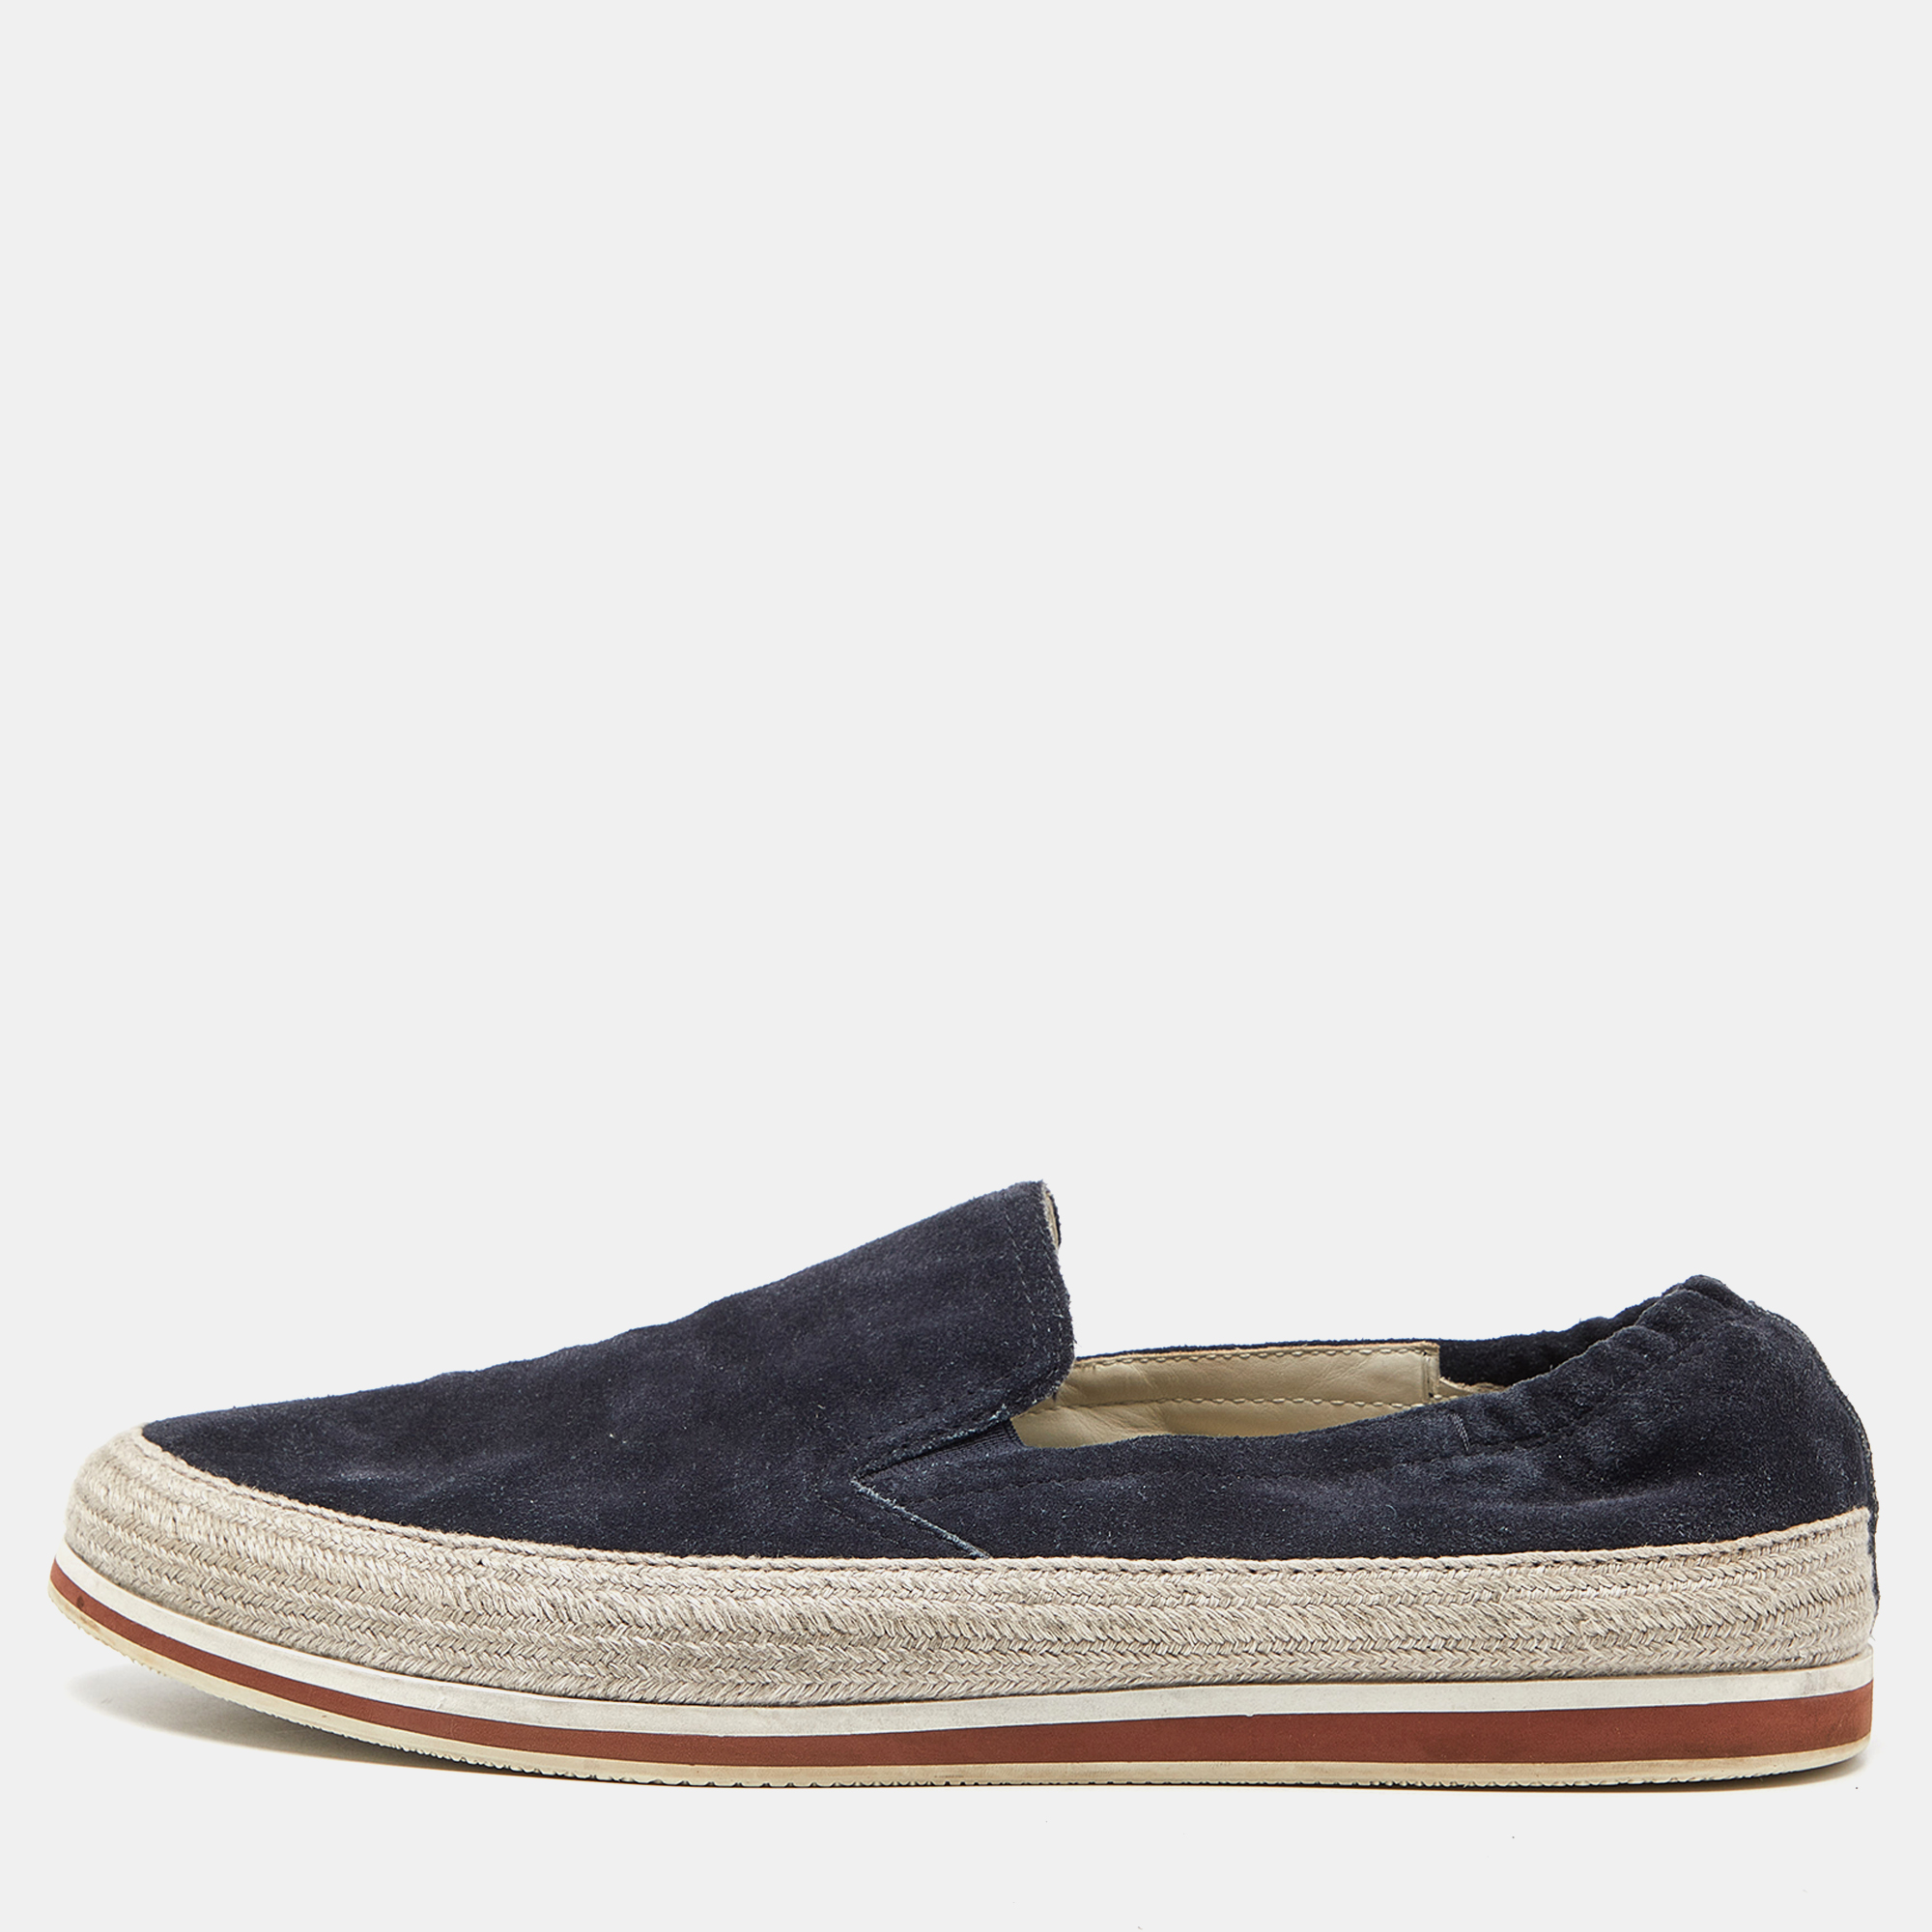 Pre-owned Prada Blue Suede Espadrille Slip On Sneakers Size 40